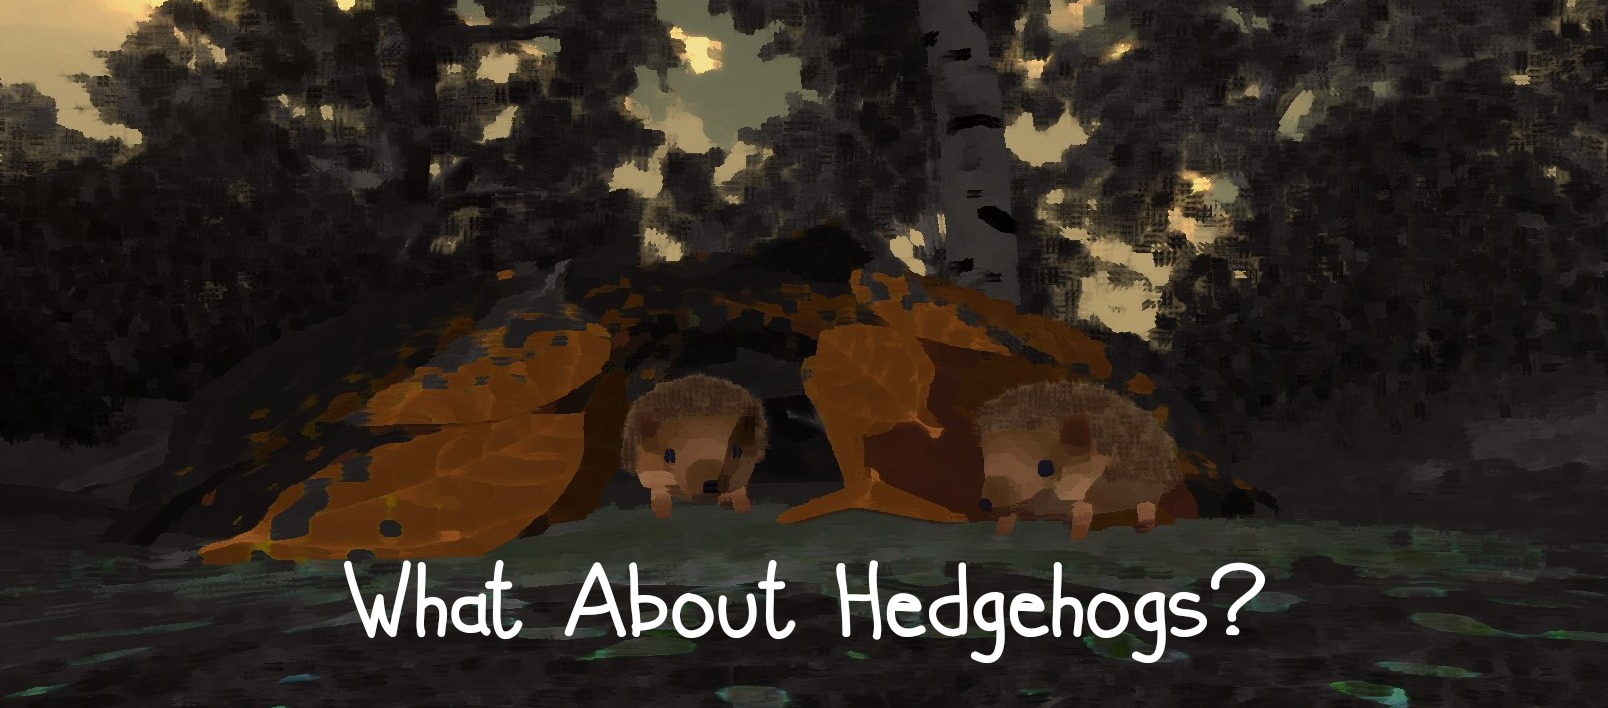 What About Hedgehogs?